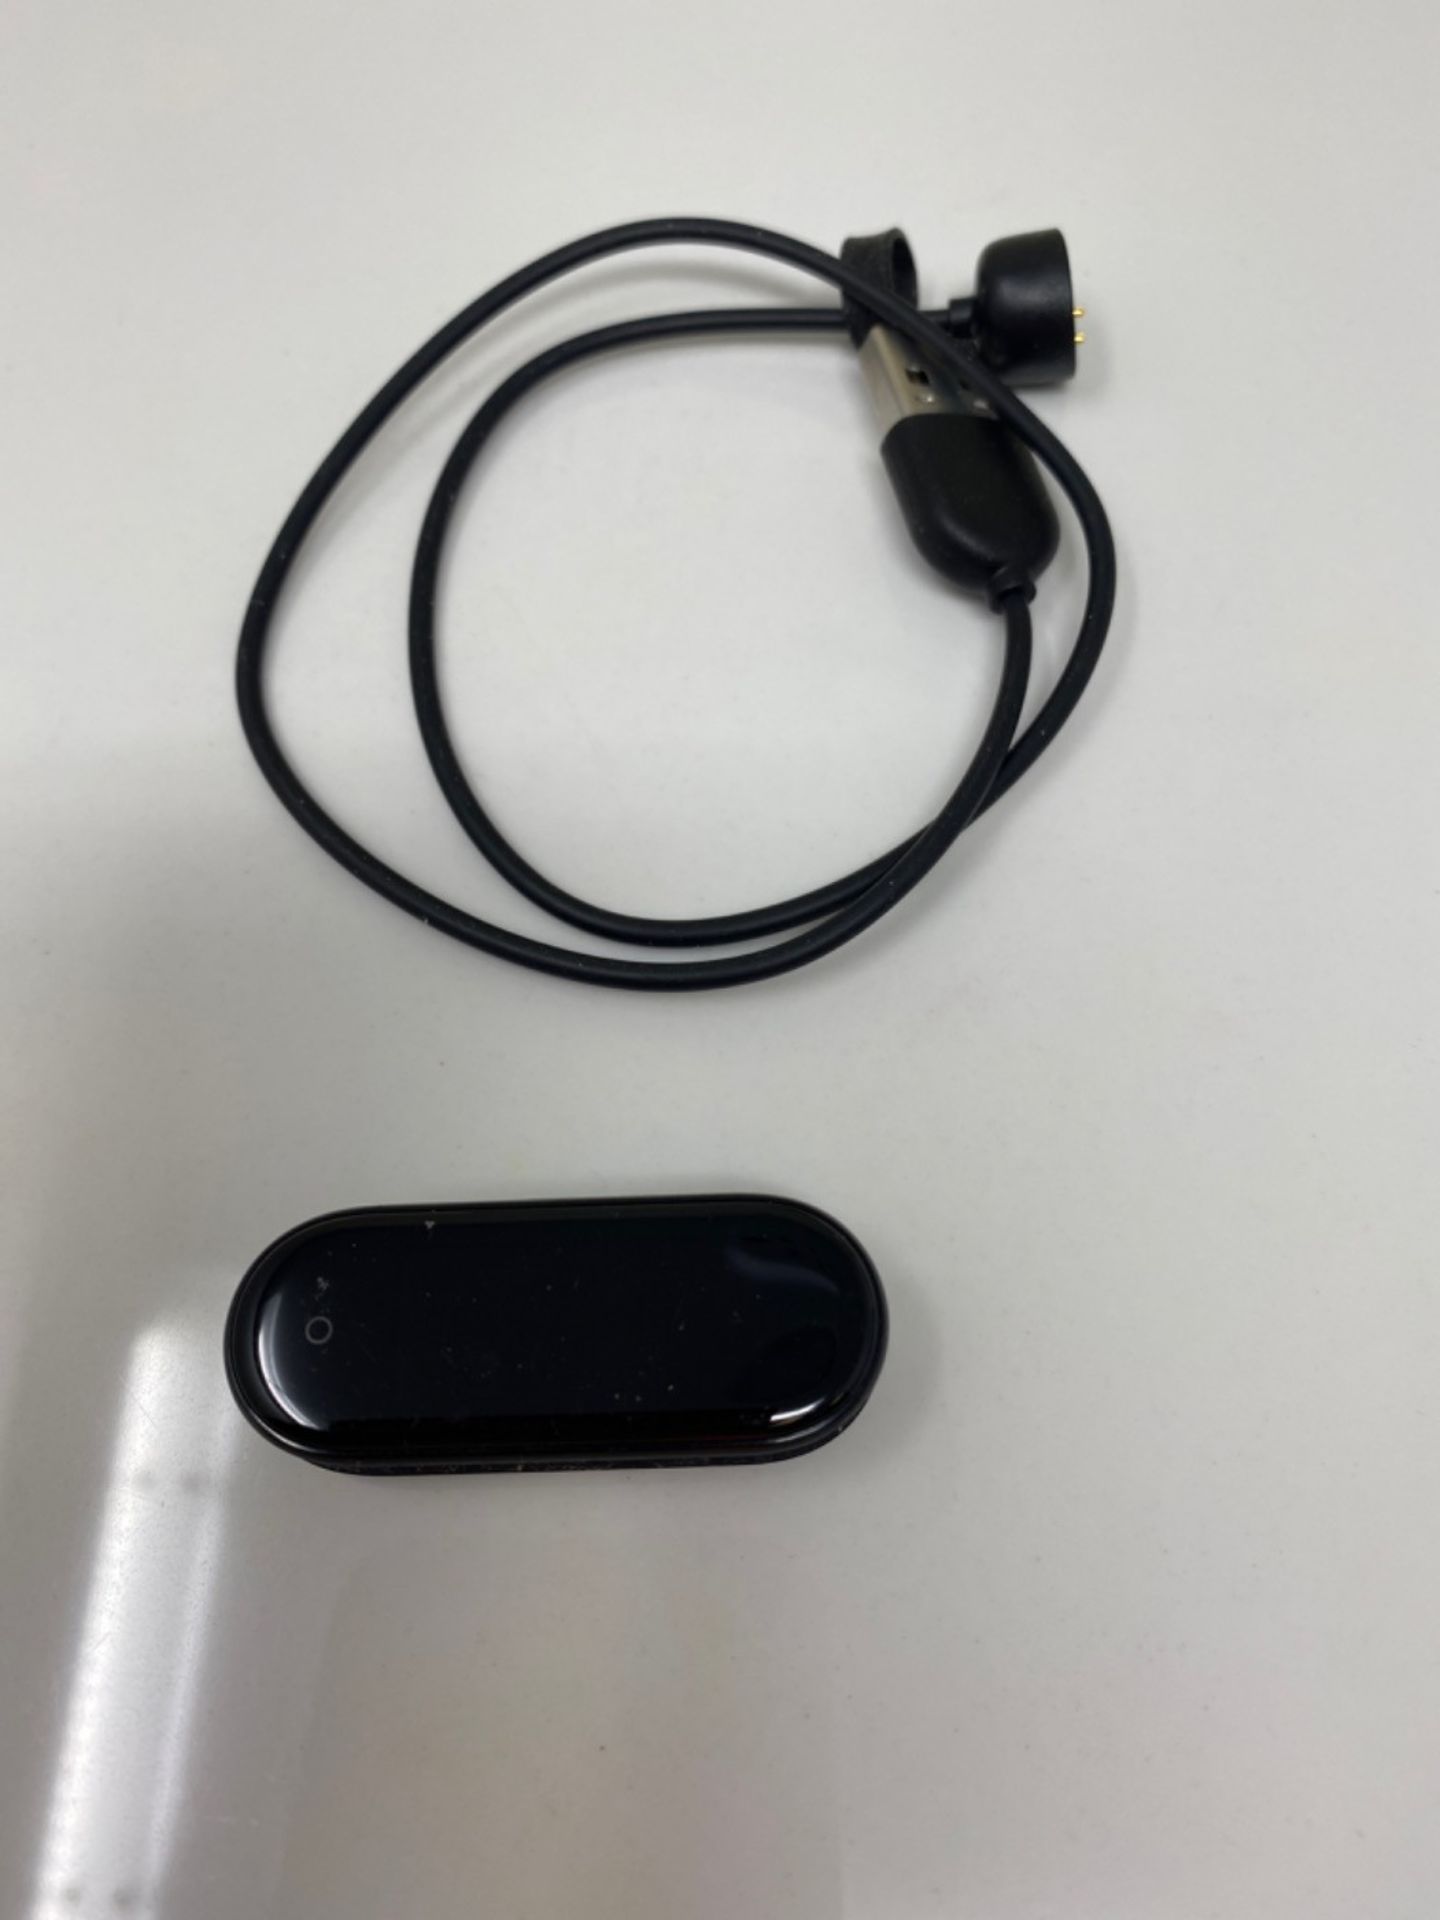 Xiaomi Mi Smart Band 5 fitness & activity tracker with 1.1 inch full AMOLED touch colo - Image 2 of 2